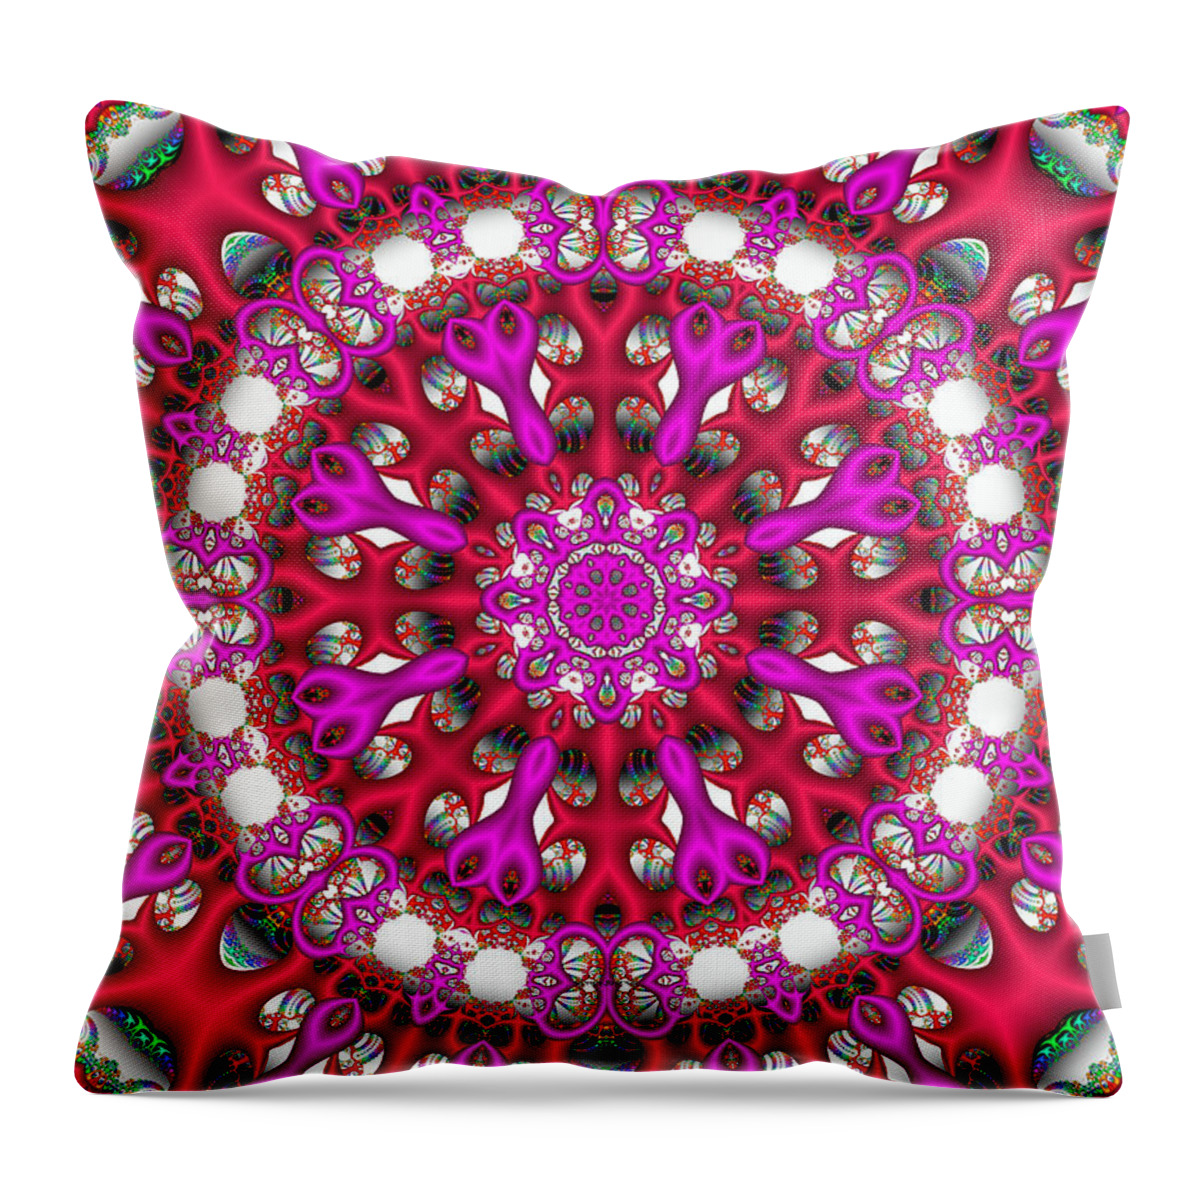 Red Throw Pillow featuring the digital art Chemistry- by Robert Orinski